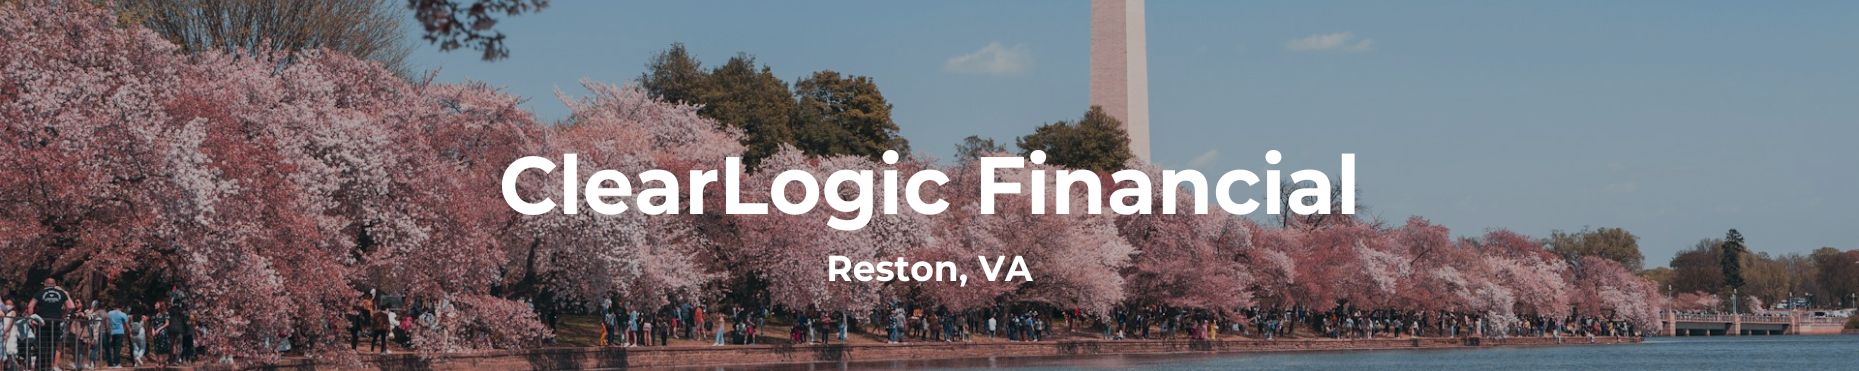 ClearLogic Financial Transition Page Header